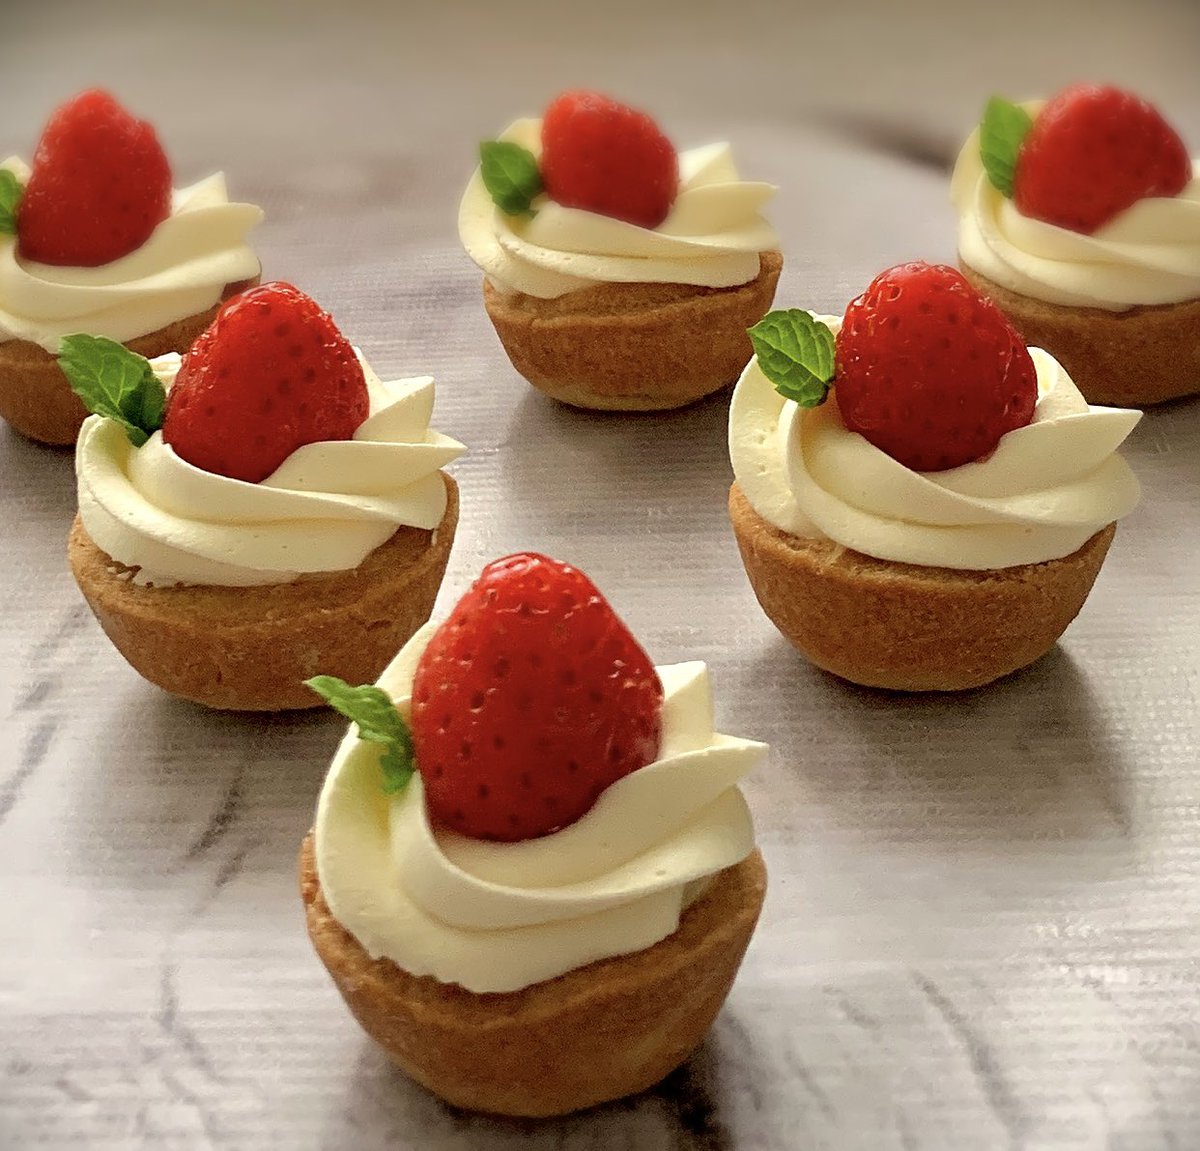 Bite sized strawberry tarts … filled with creme patisserie and chantilly cream 🍓🍓🍓